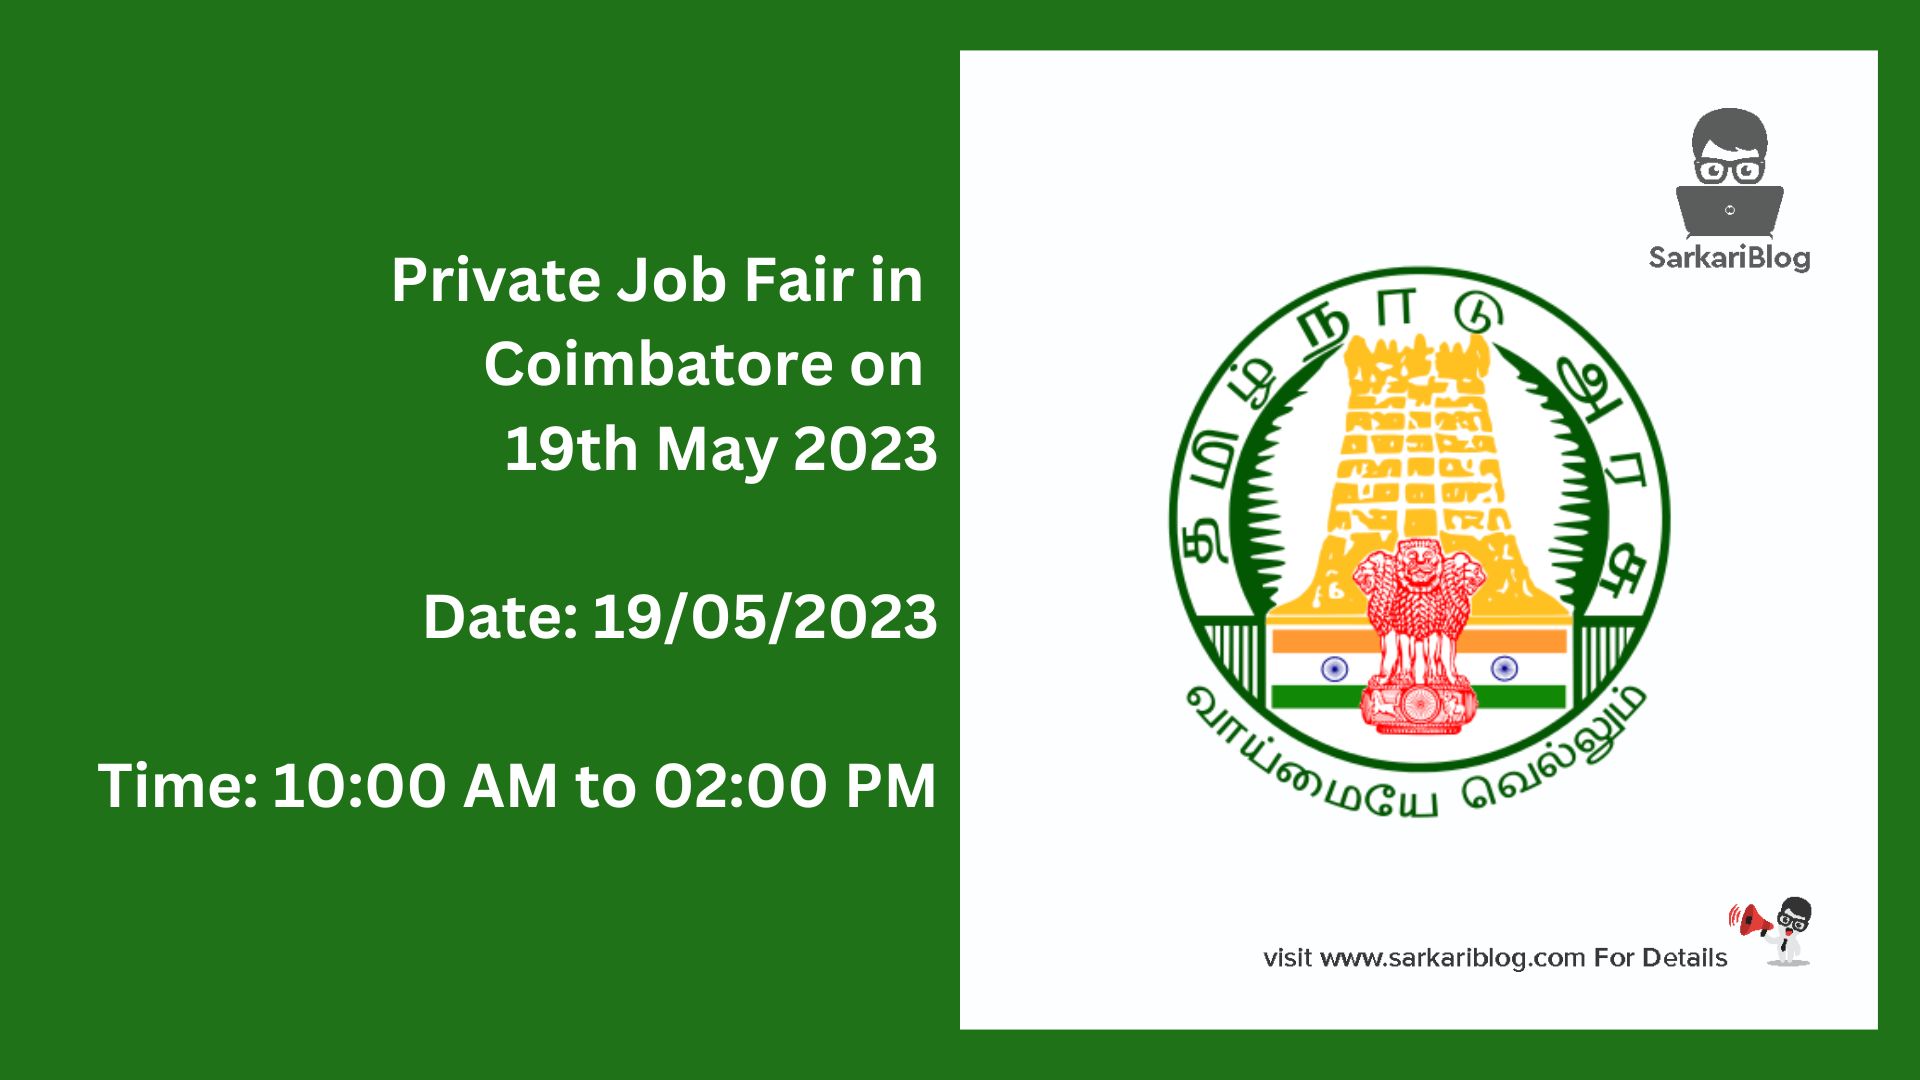 Private Job Fair in Coimbatore on 19th May 2023